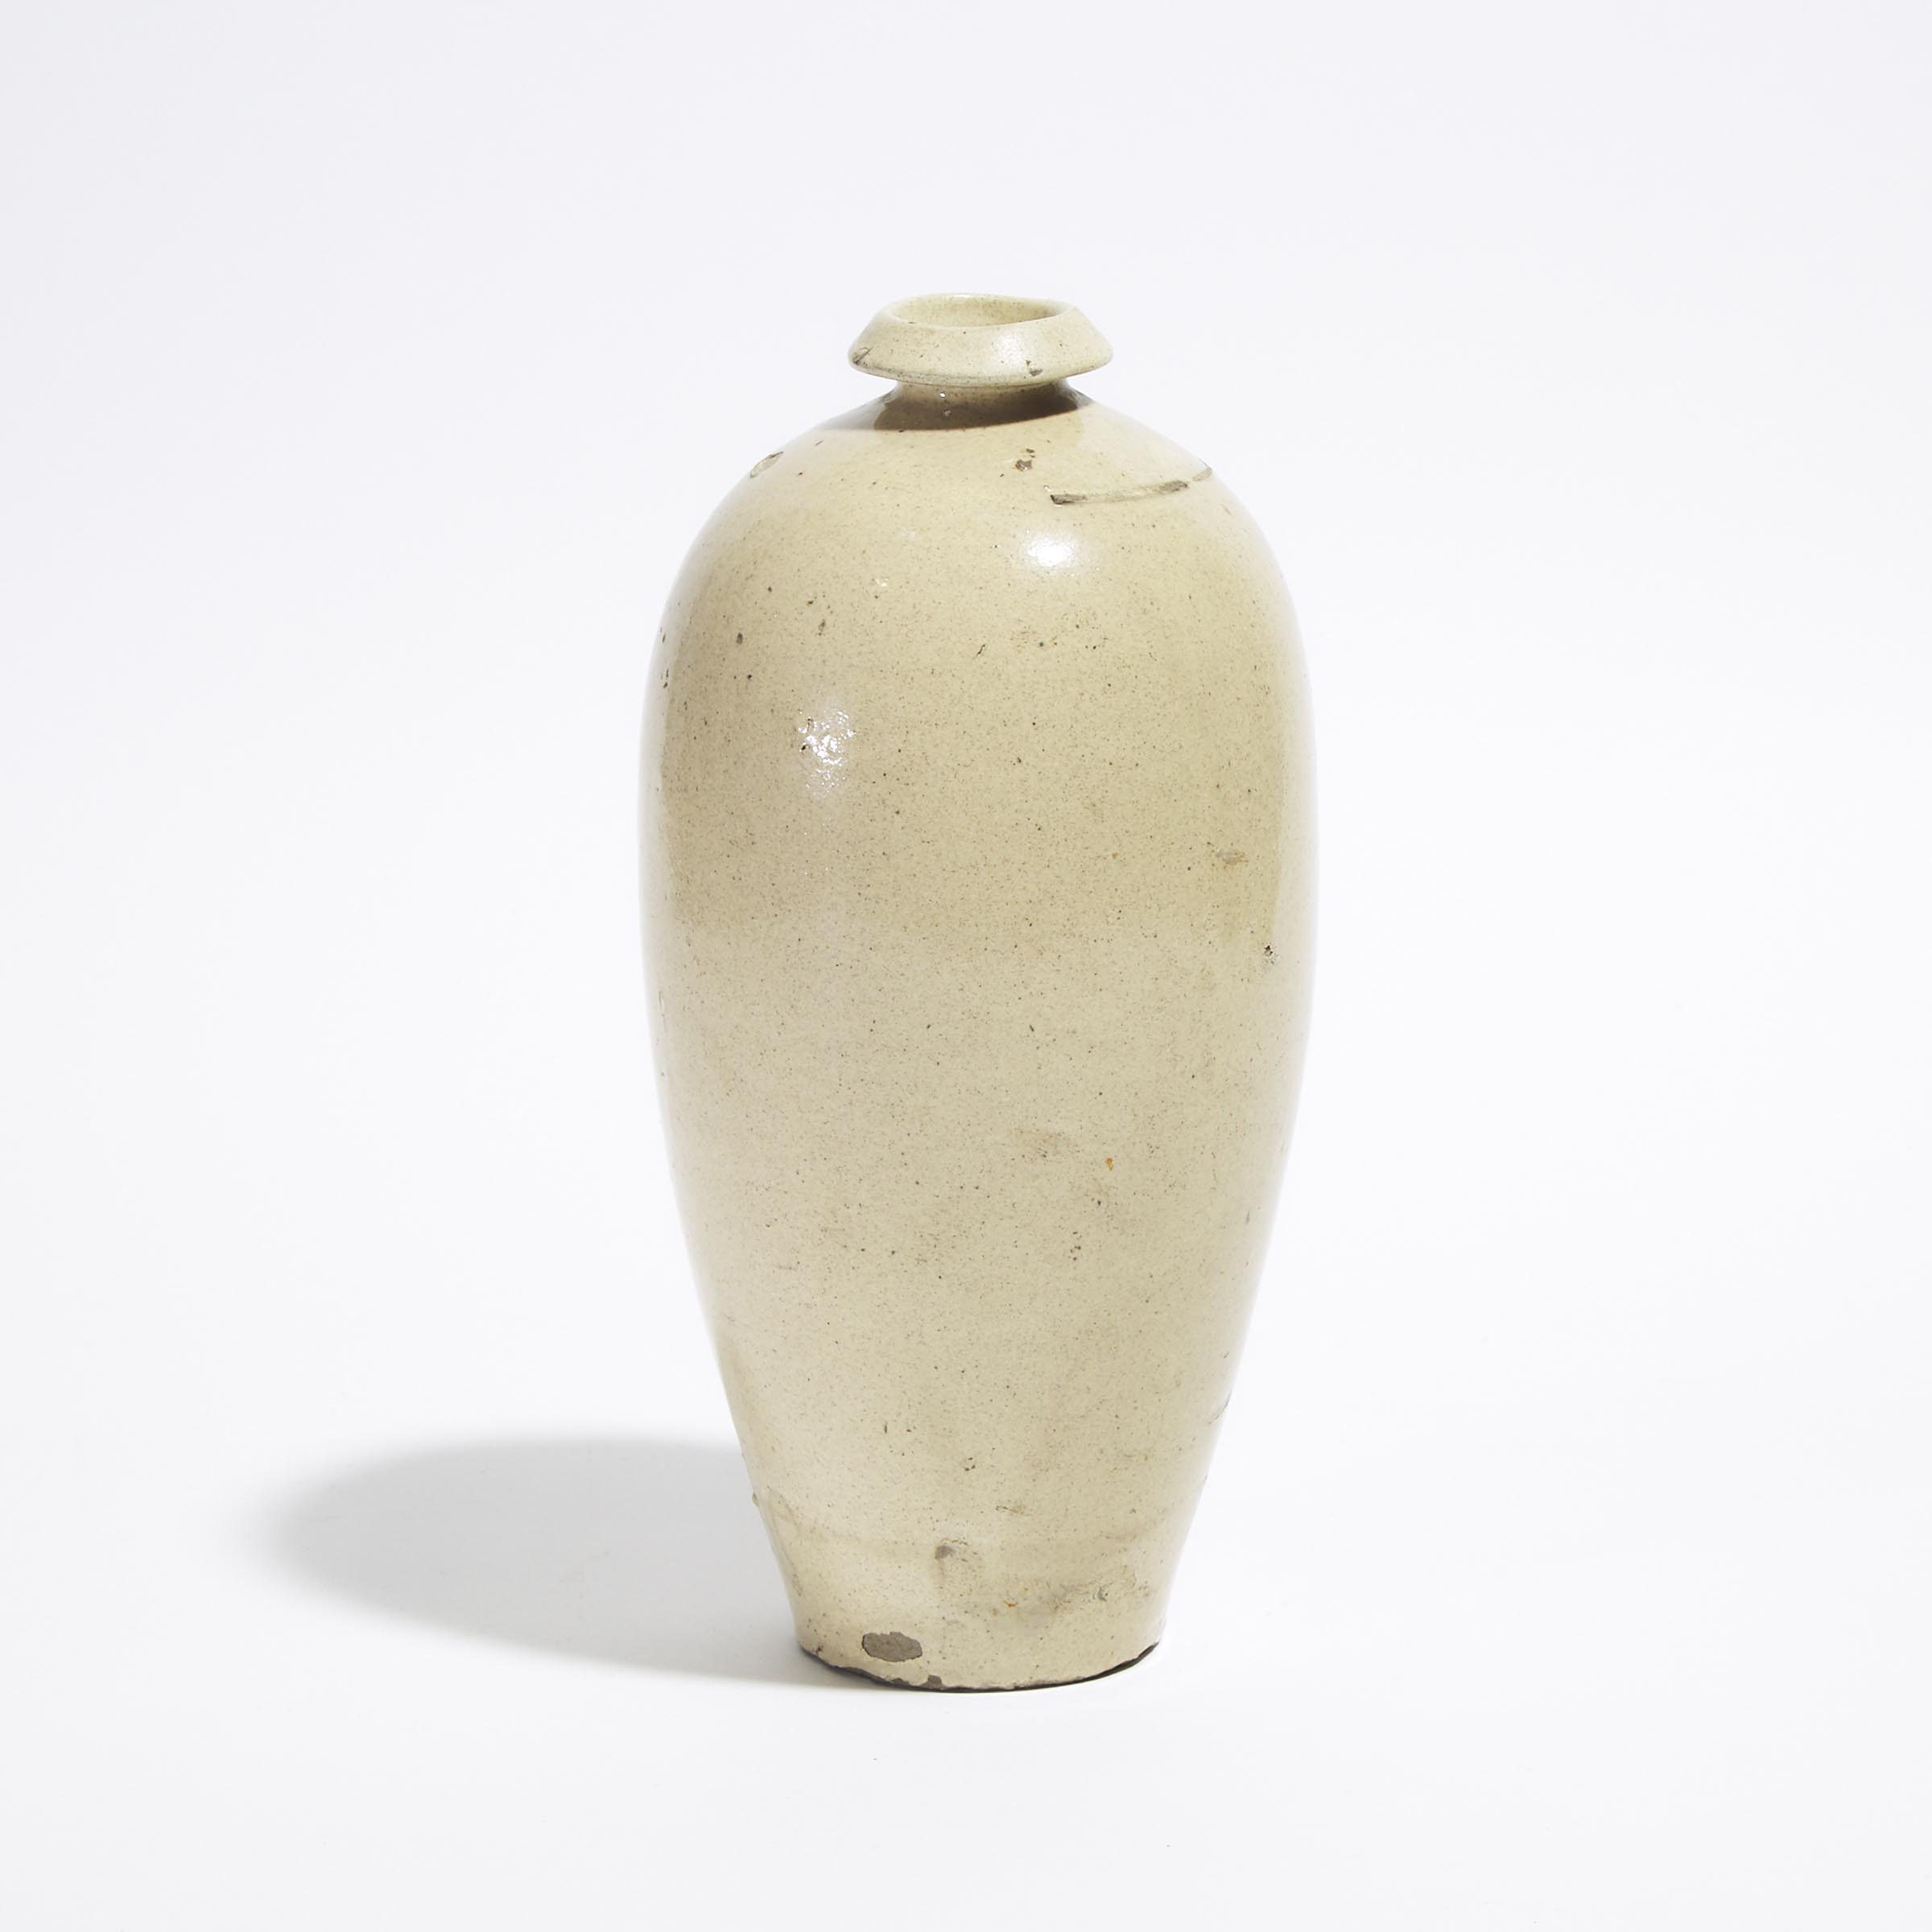 A Pale-Glazed Meiping Vase, Ming Dynasty (1368-1644)